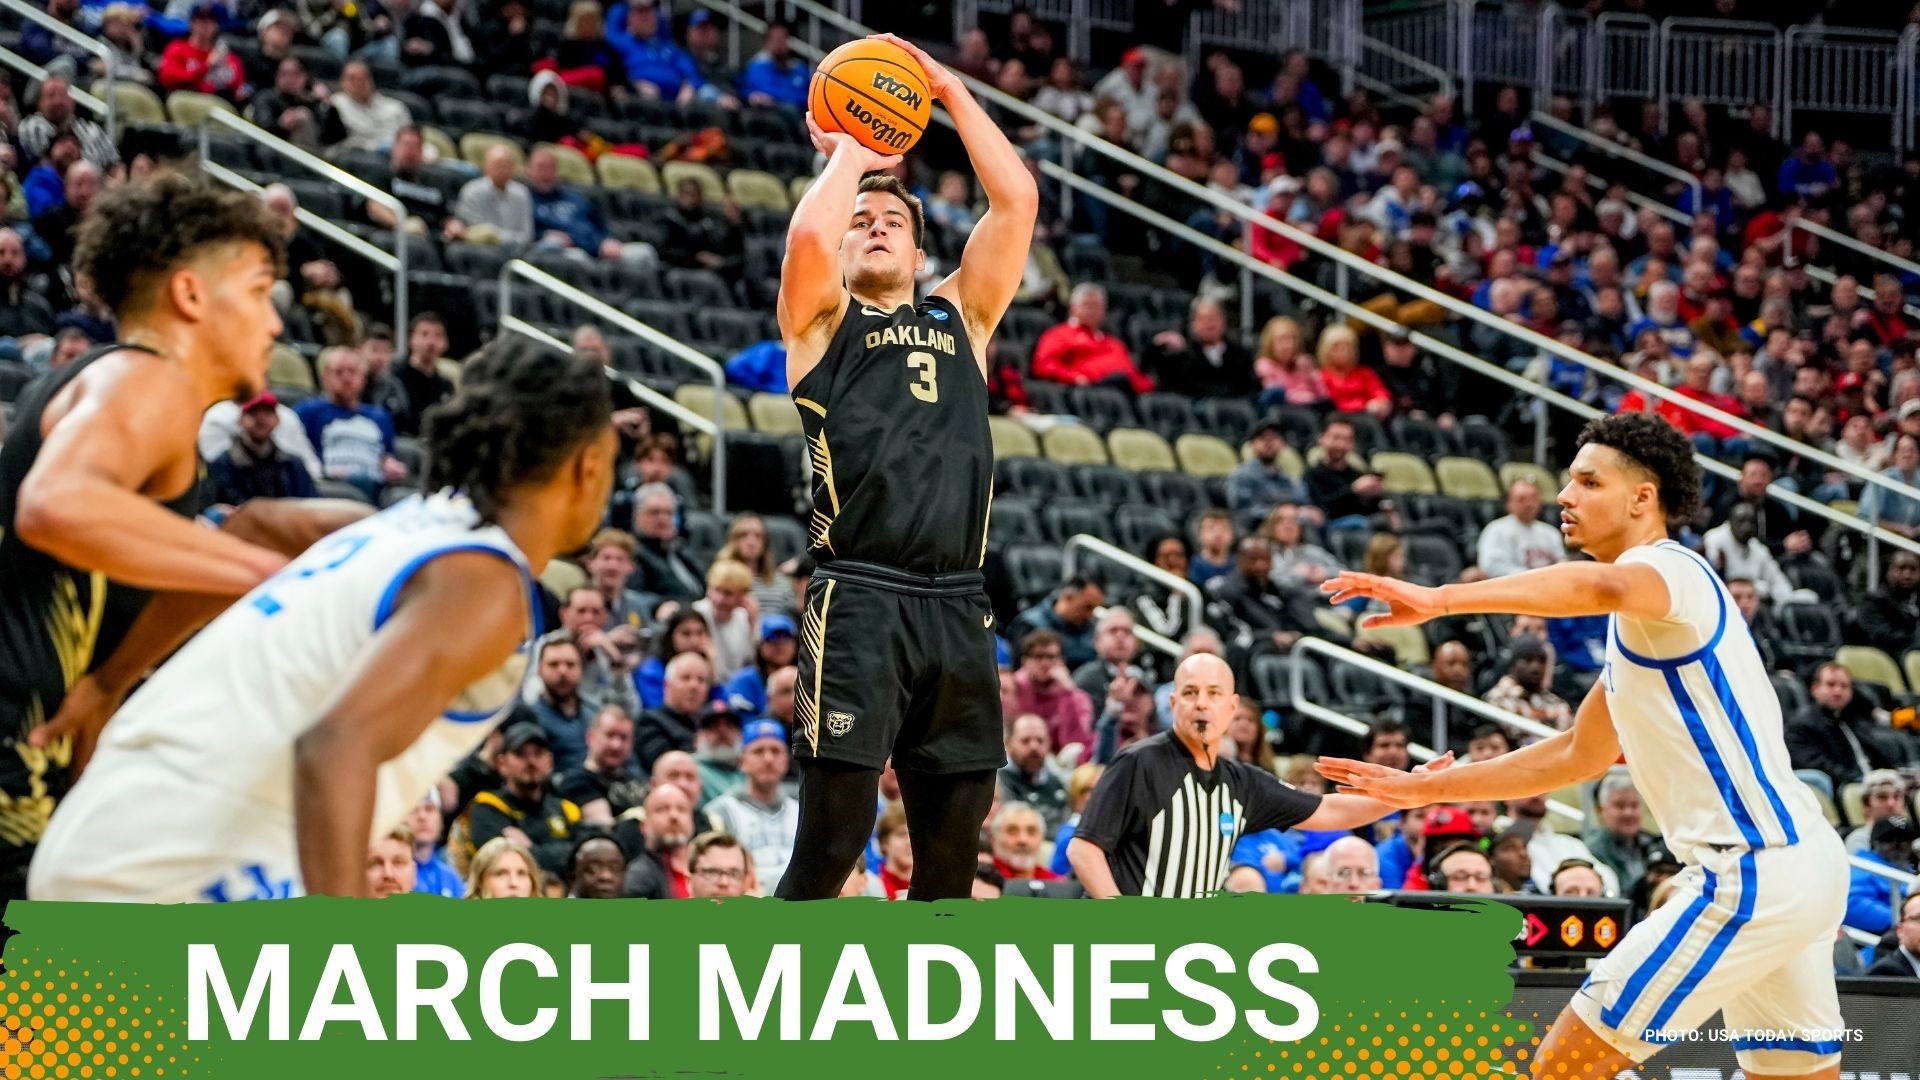 Discussing the day's top sports stories from March Madness begins with major upsets to debating if the NFL needs revamped kickoff rules.